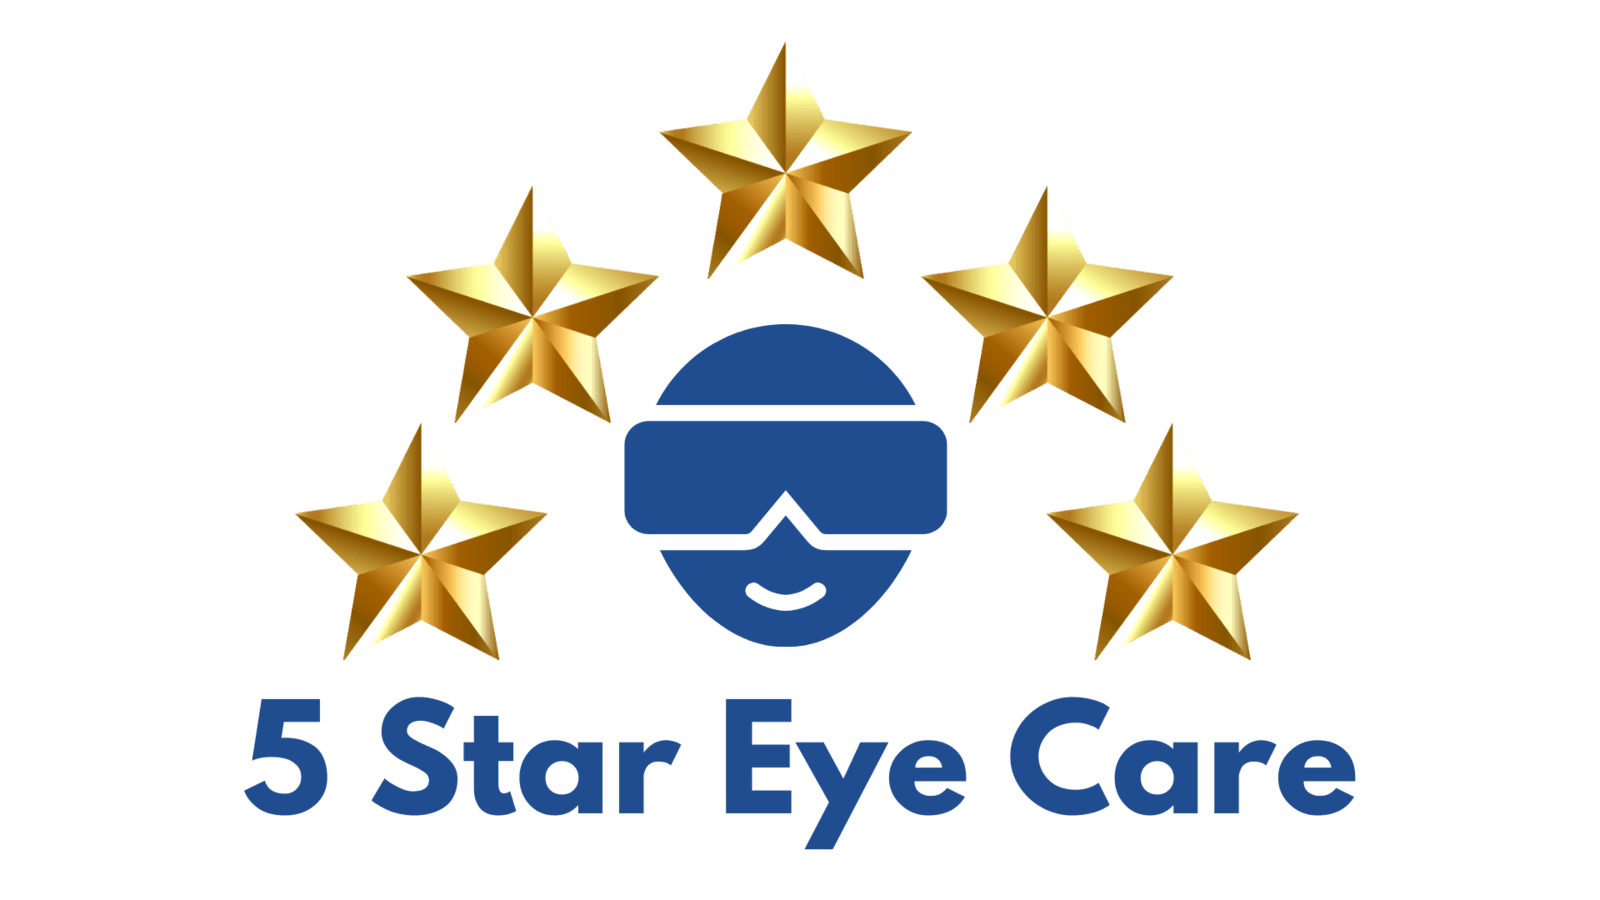 5 gold stars around round blue face with goggle type glasses. Words below: 5 Star Eye Care